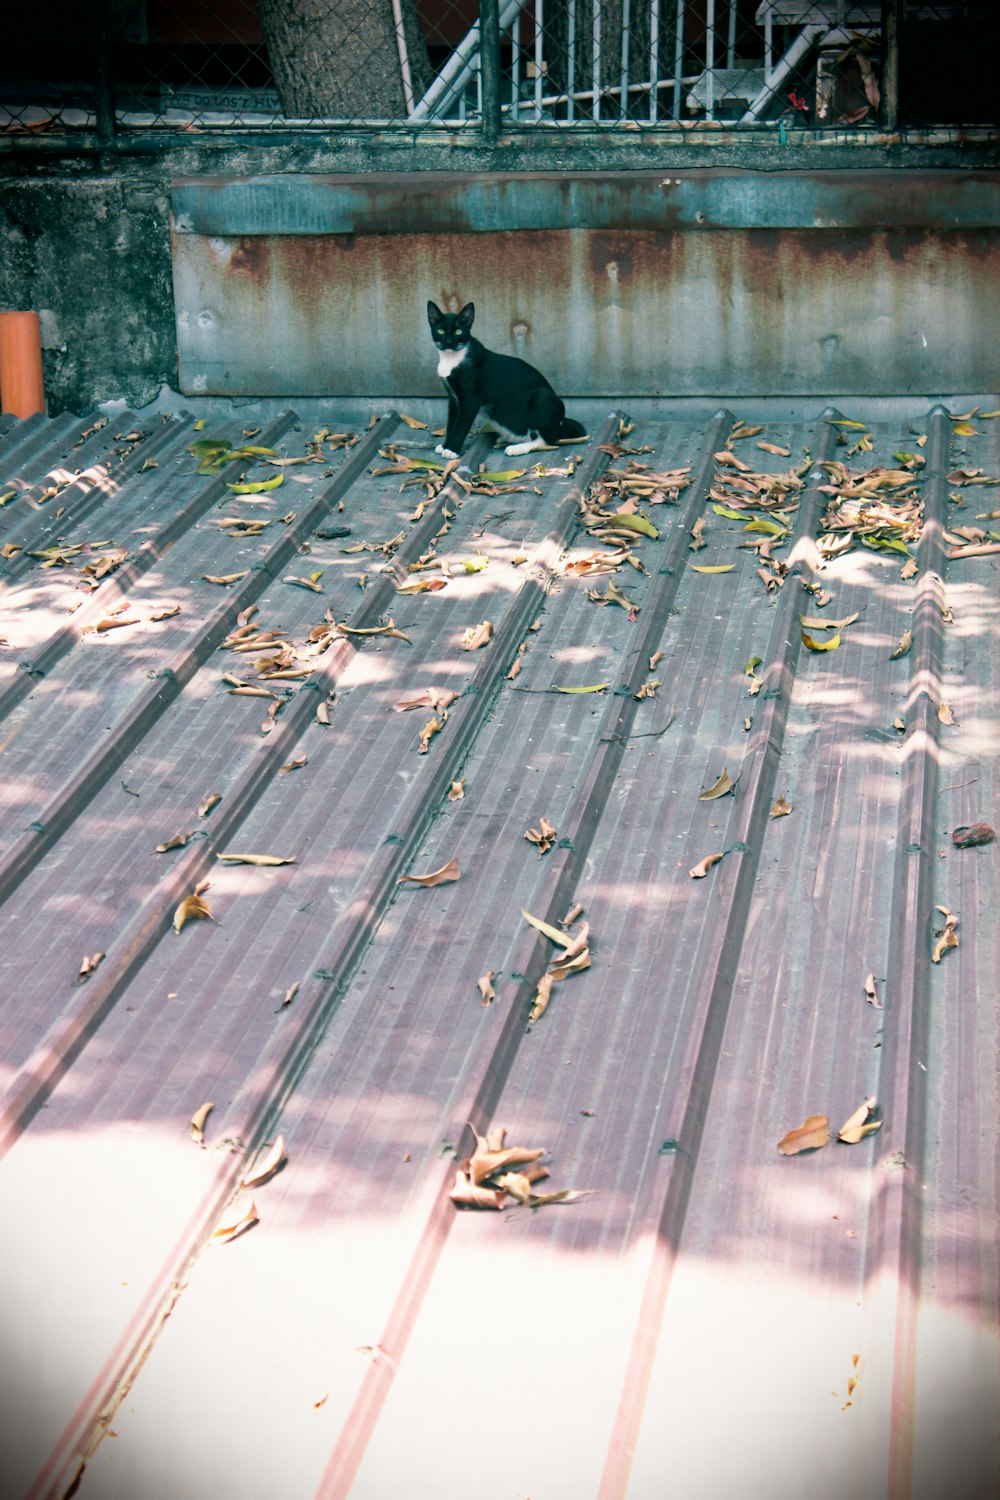 a small dog sitting on top of a wooden deck